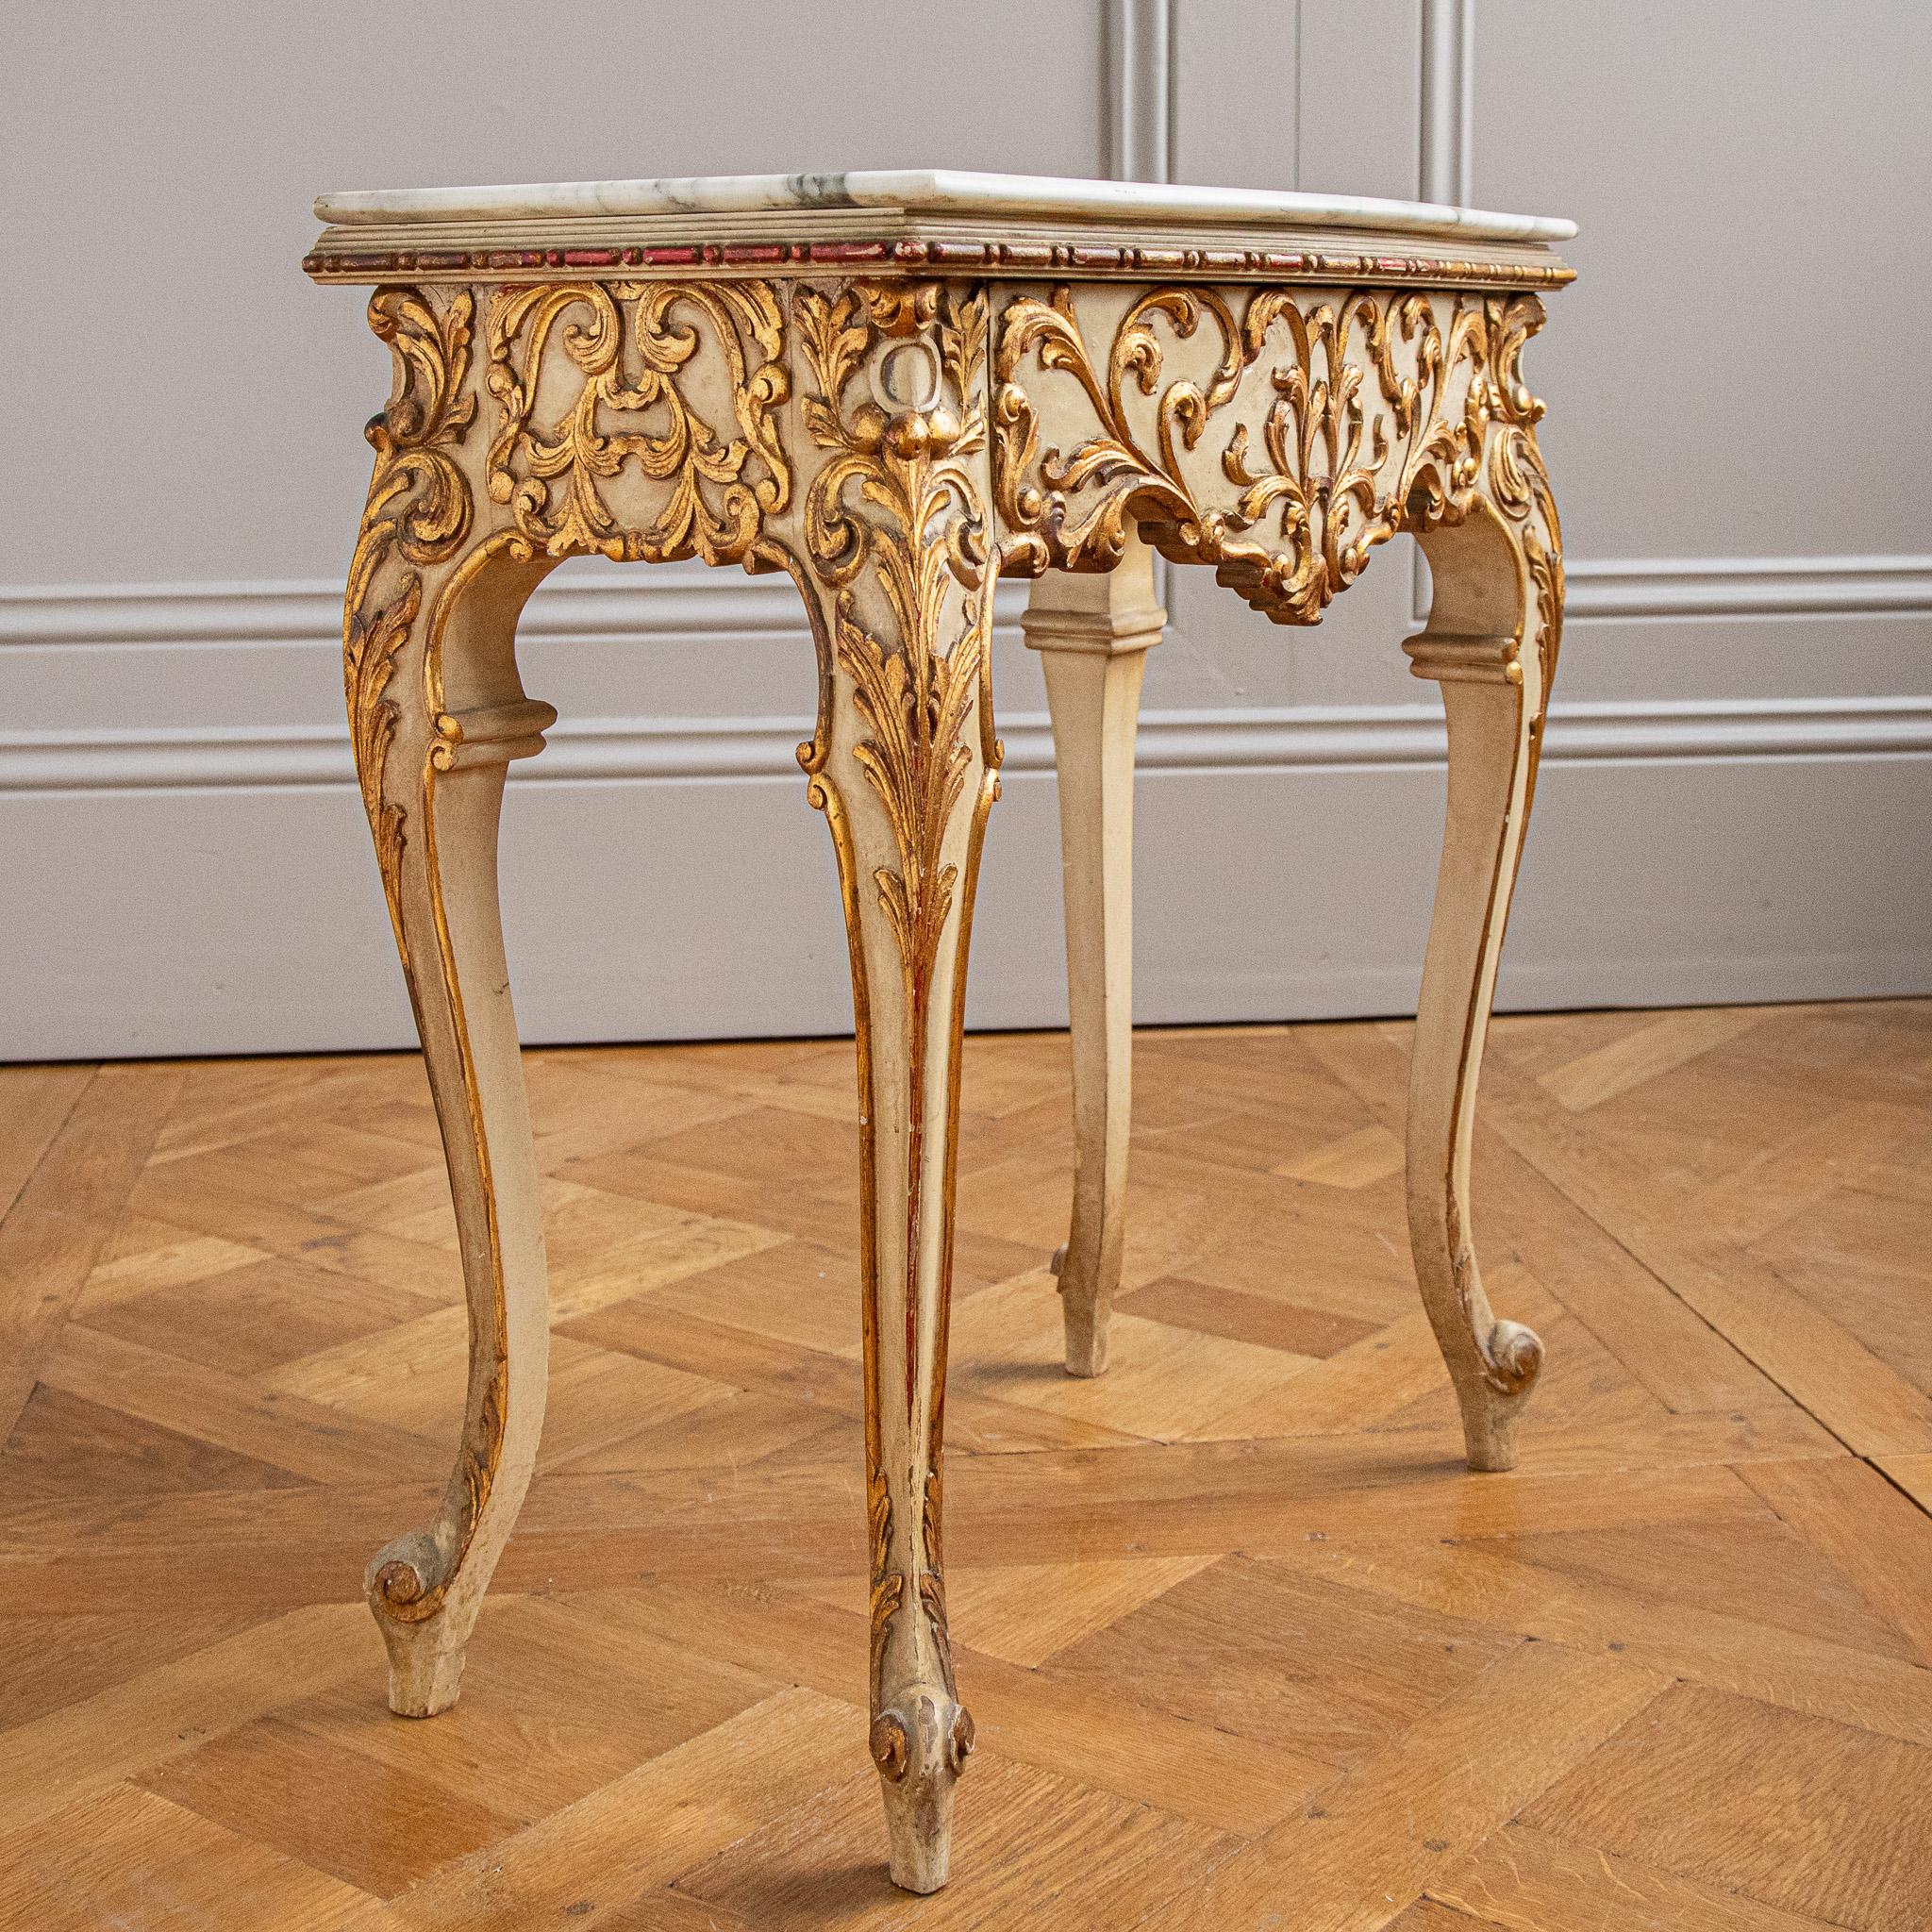 20th Century Early 1900's Venetian Style Painted with Giltwood Bedside Tables From Italy For Sale